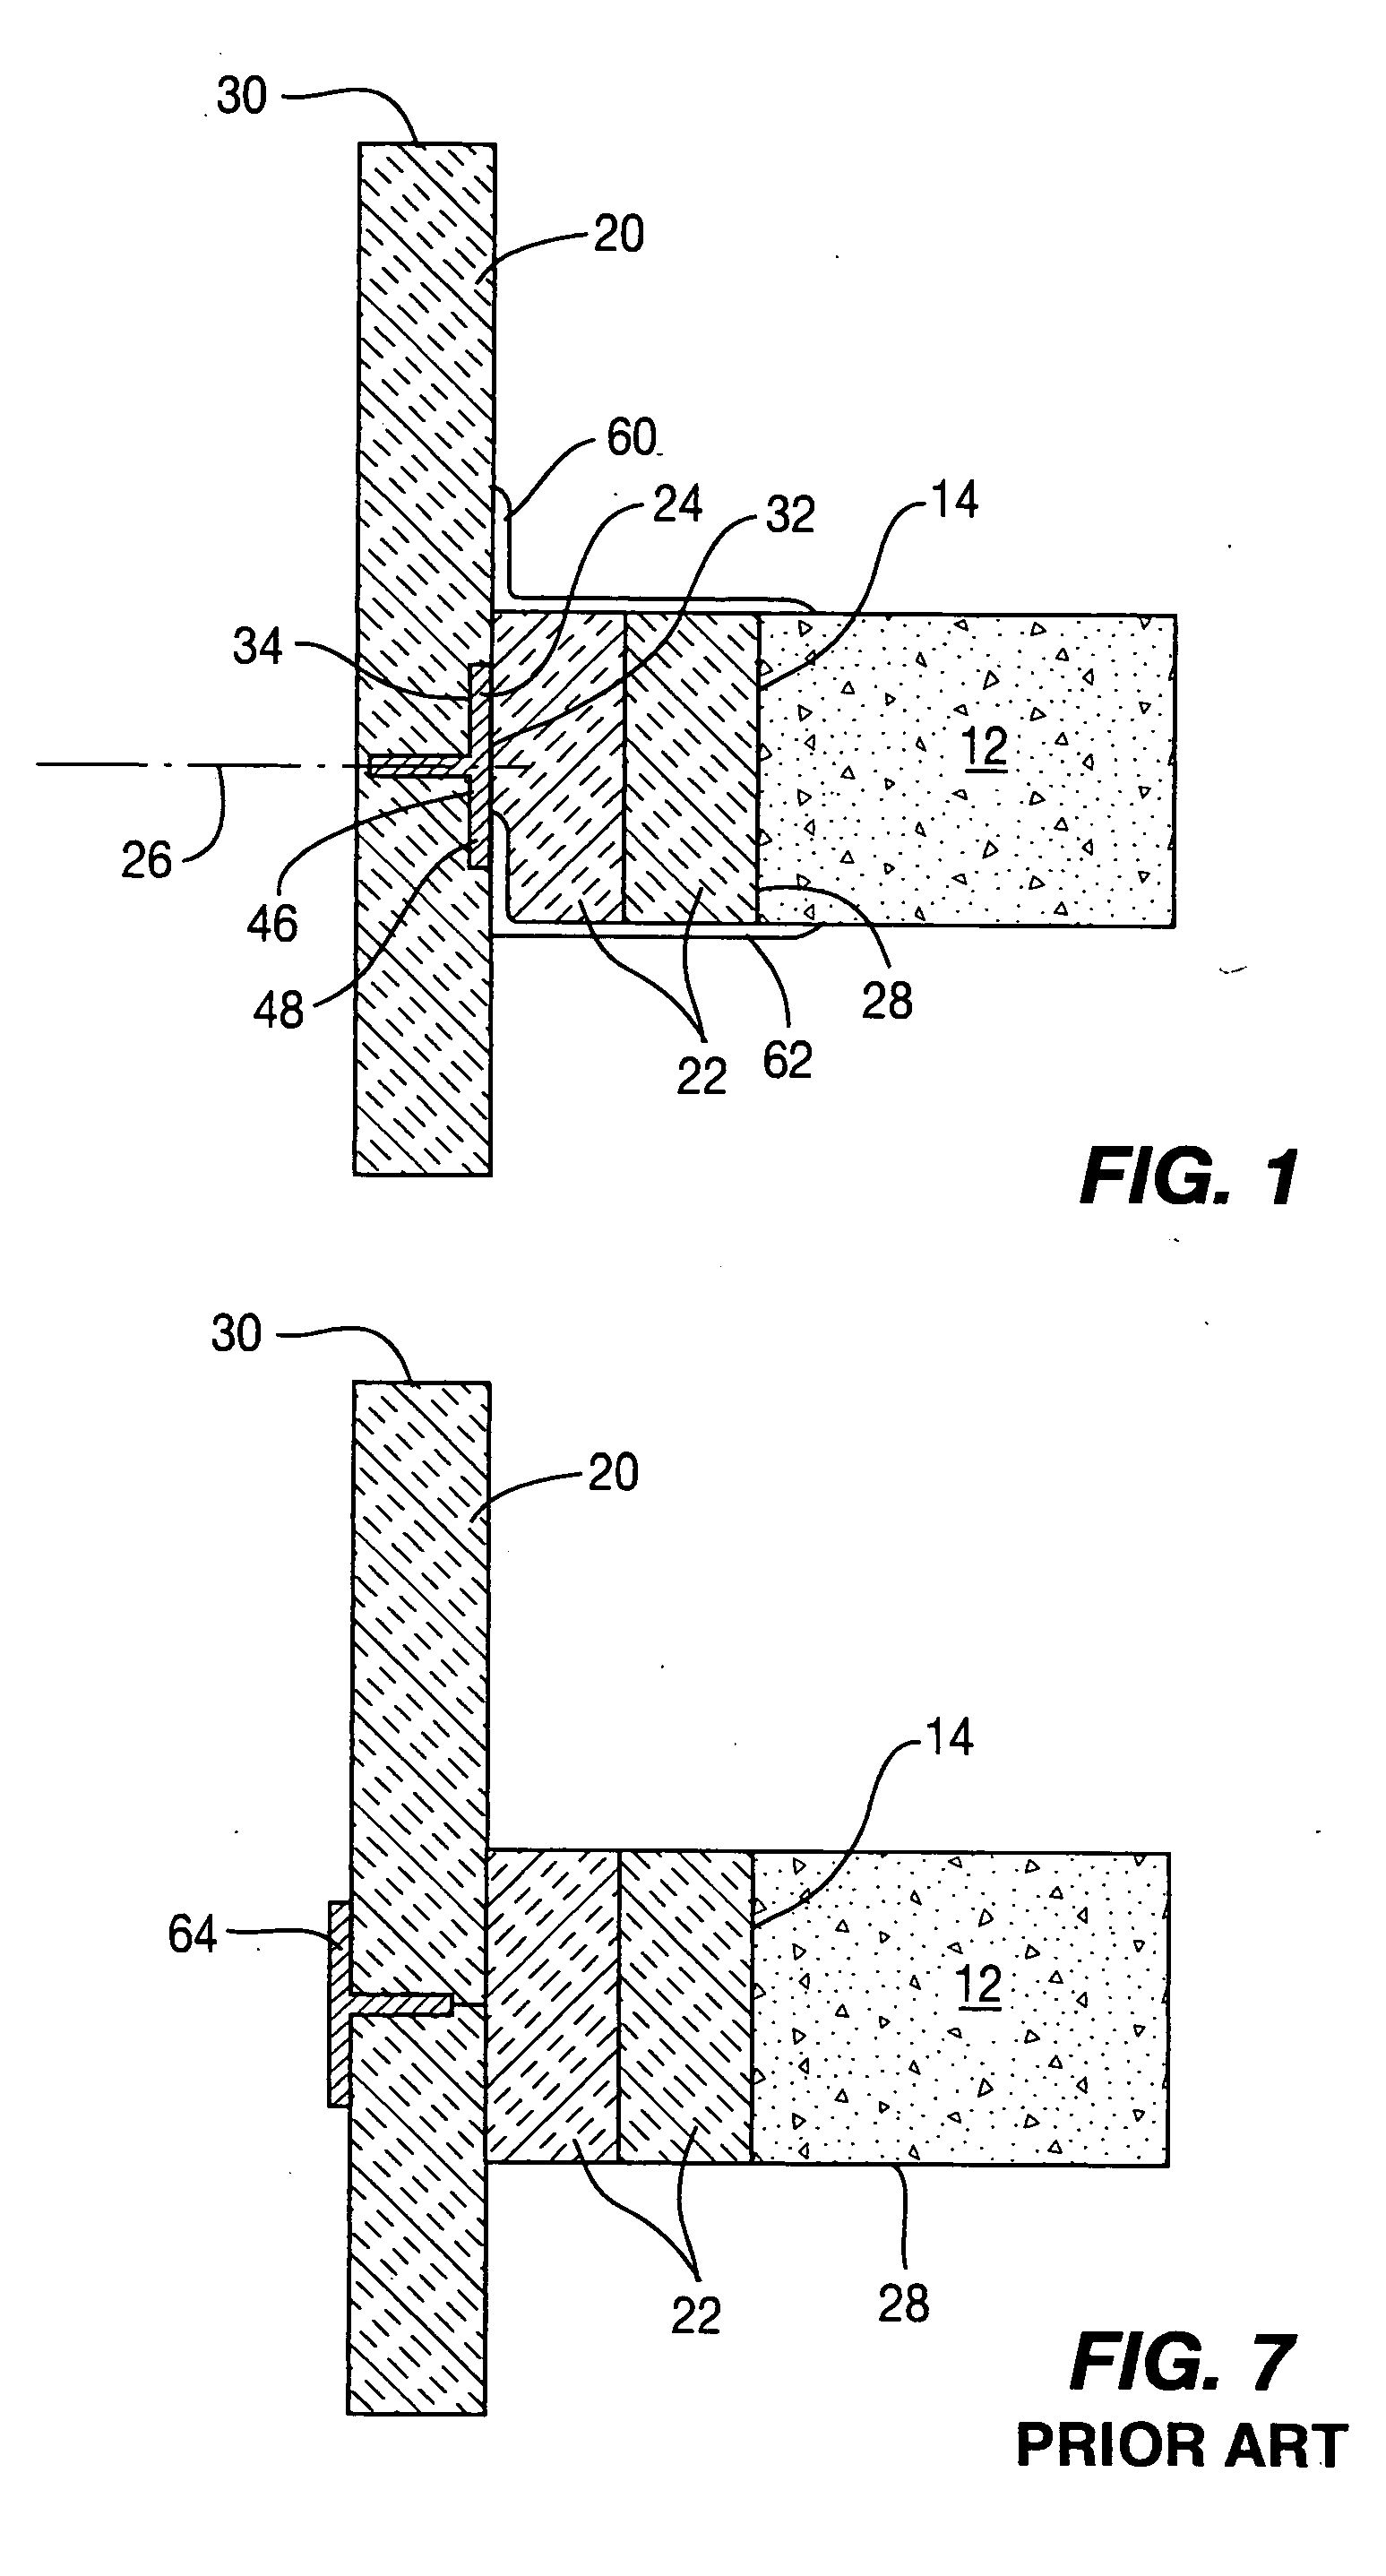 Means and method for fireproof sealing between the peripheral edge of individual floors of a building and the exterior wall structure thereof